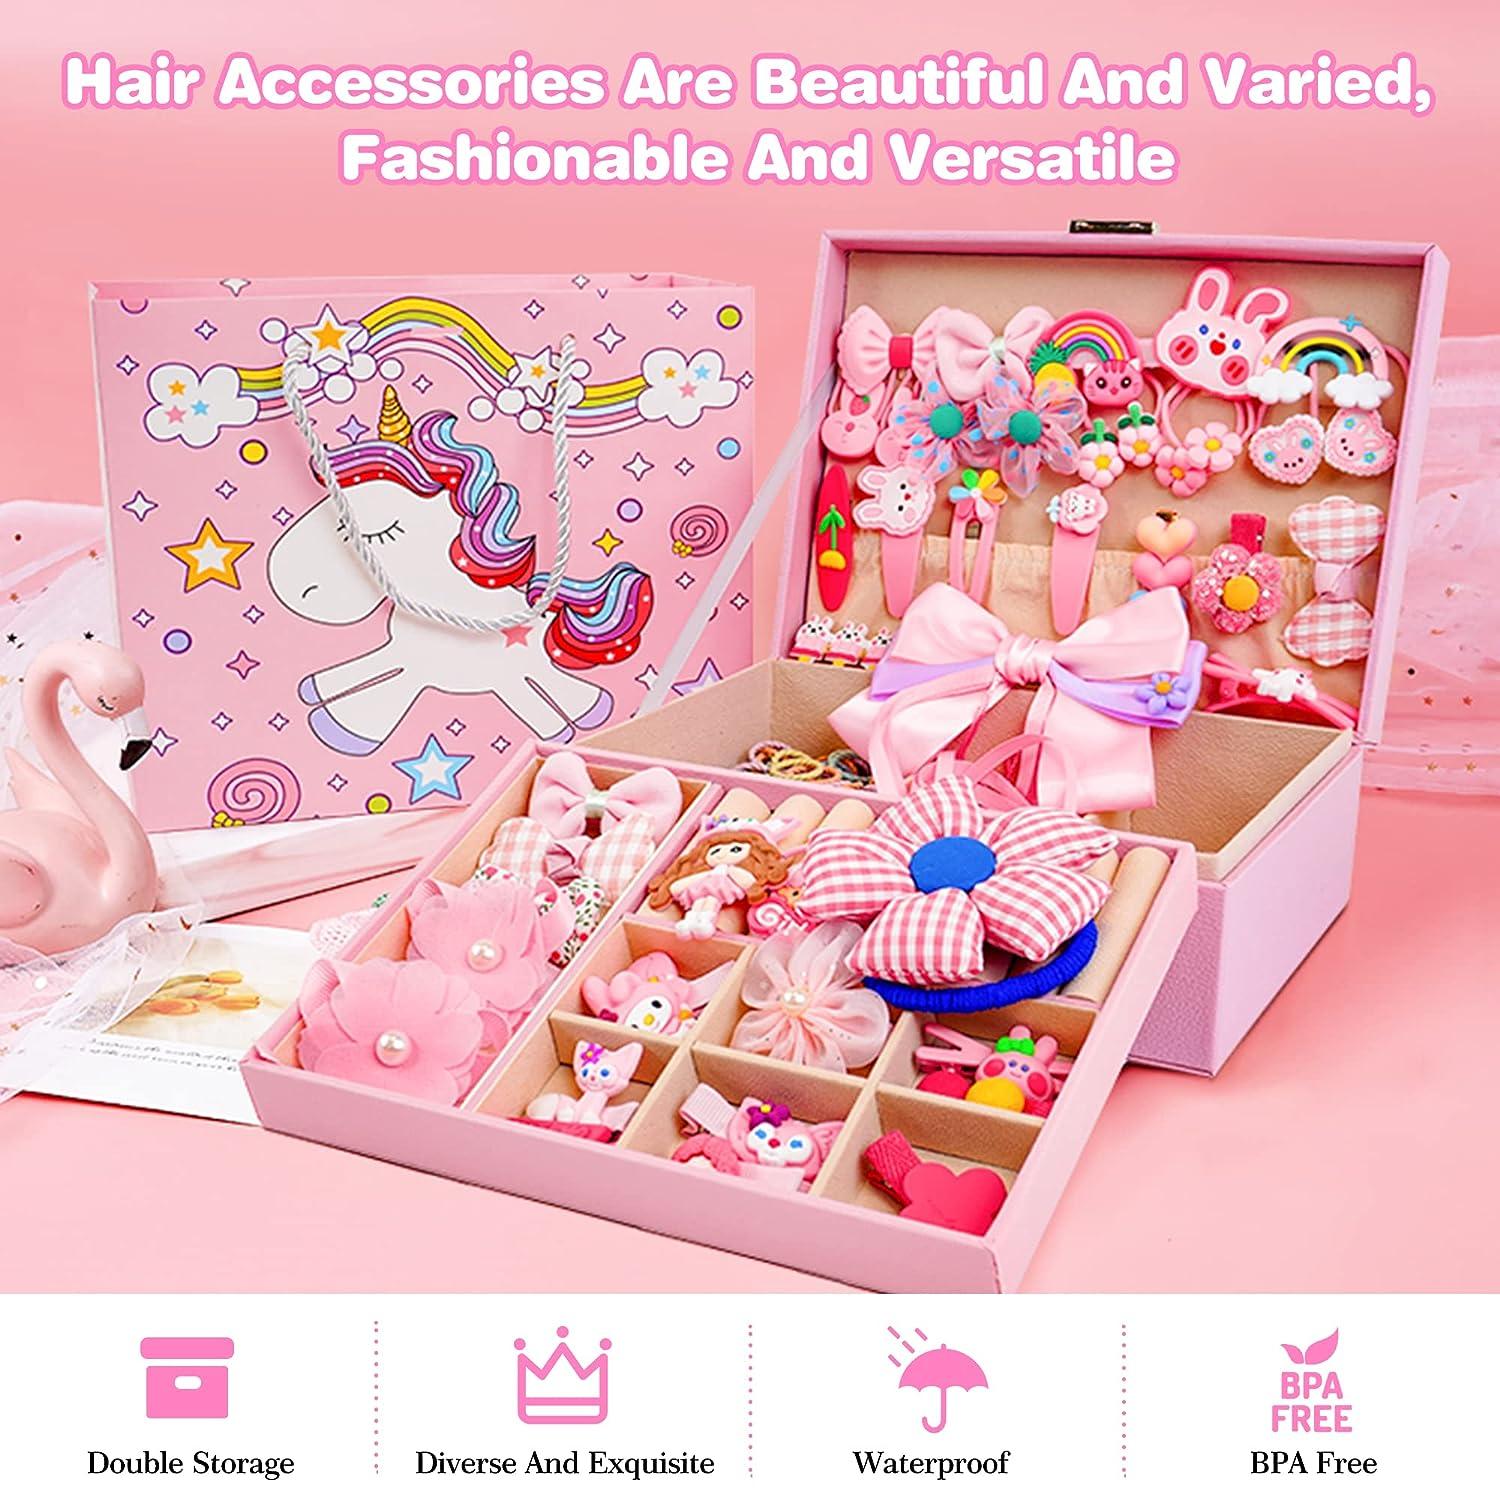 Cute Accessories For Girls, Ages 8-12